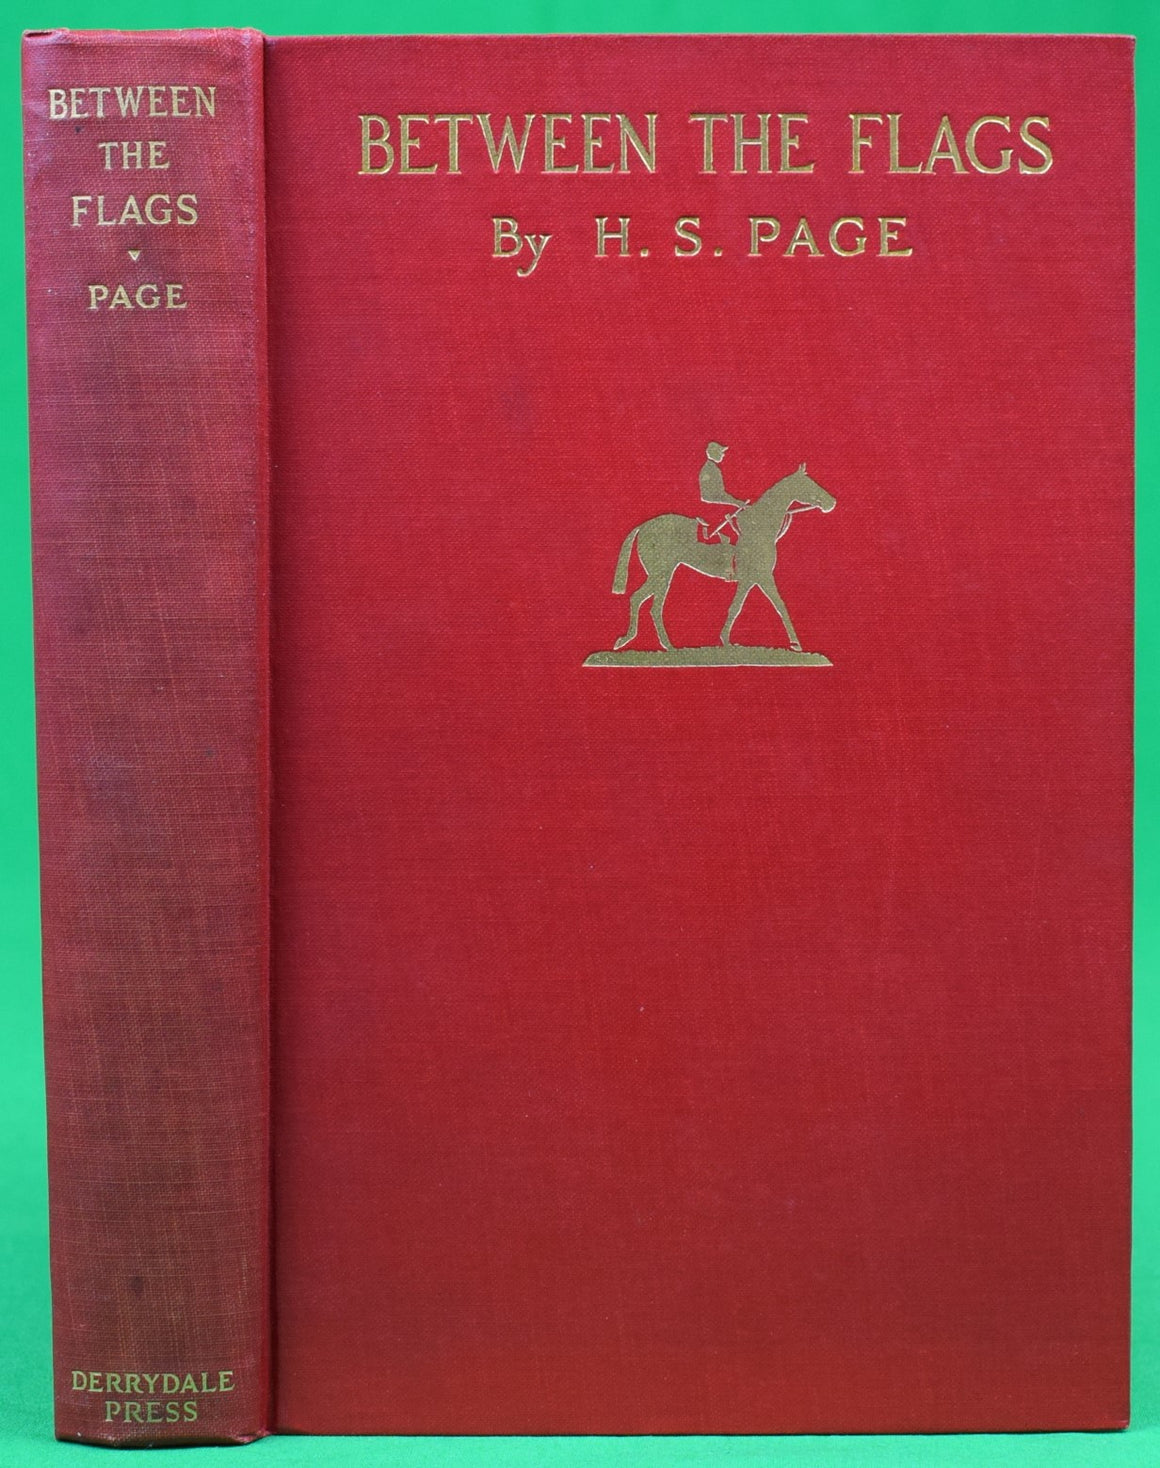 "Between The Flags" 1929 PAGE, H. S.